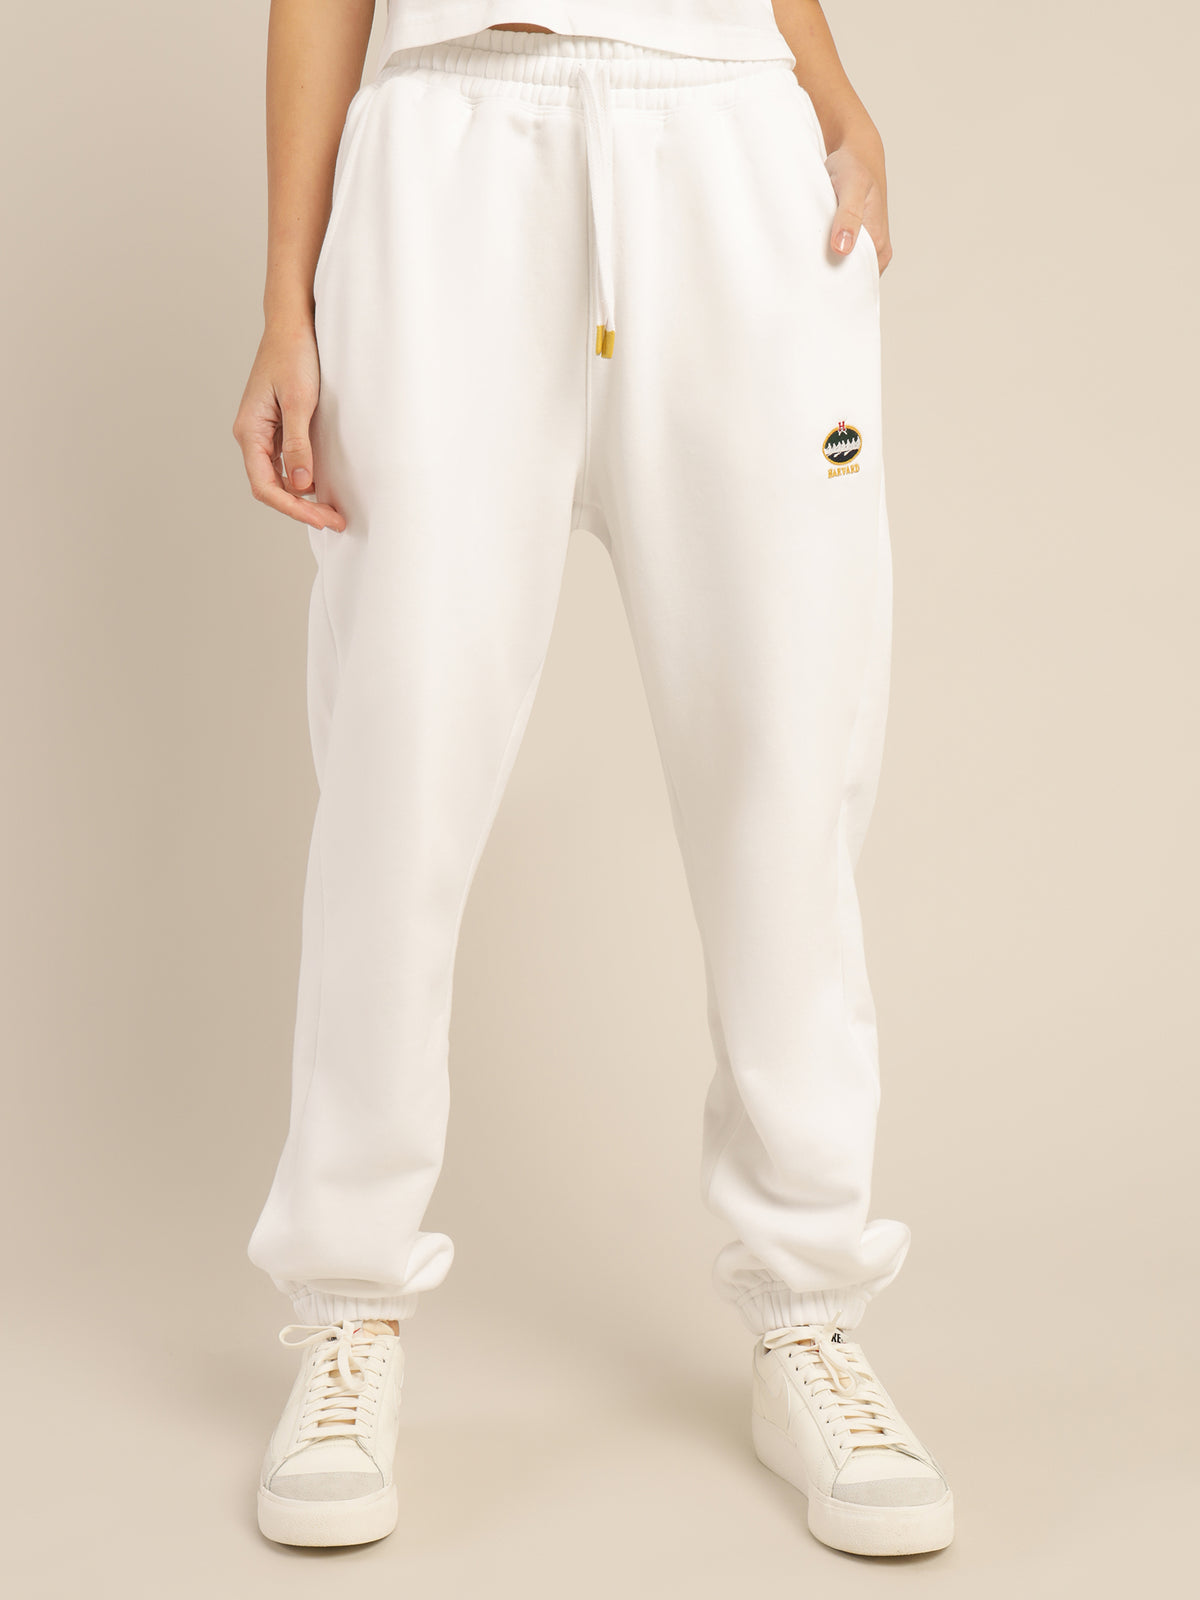 Harvard Rowing Crest Trackpants in White